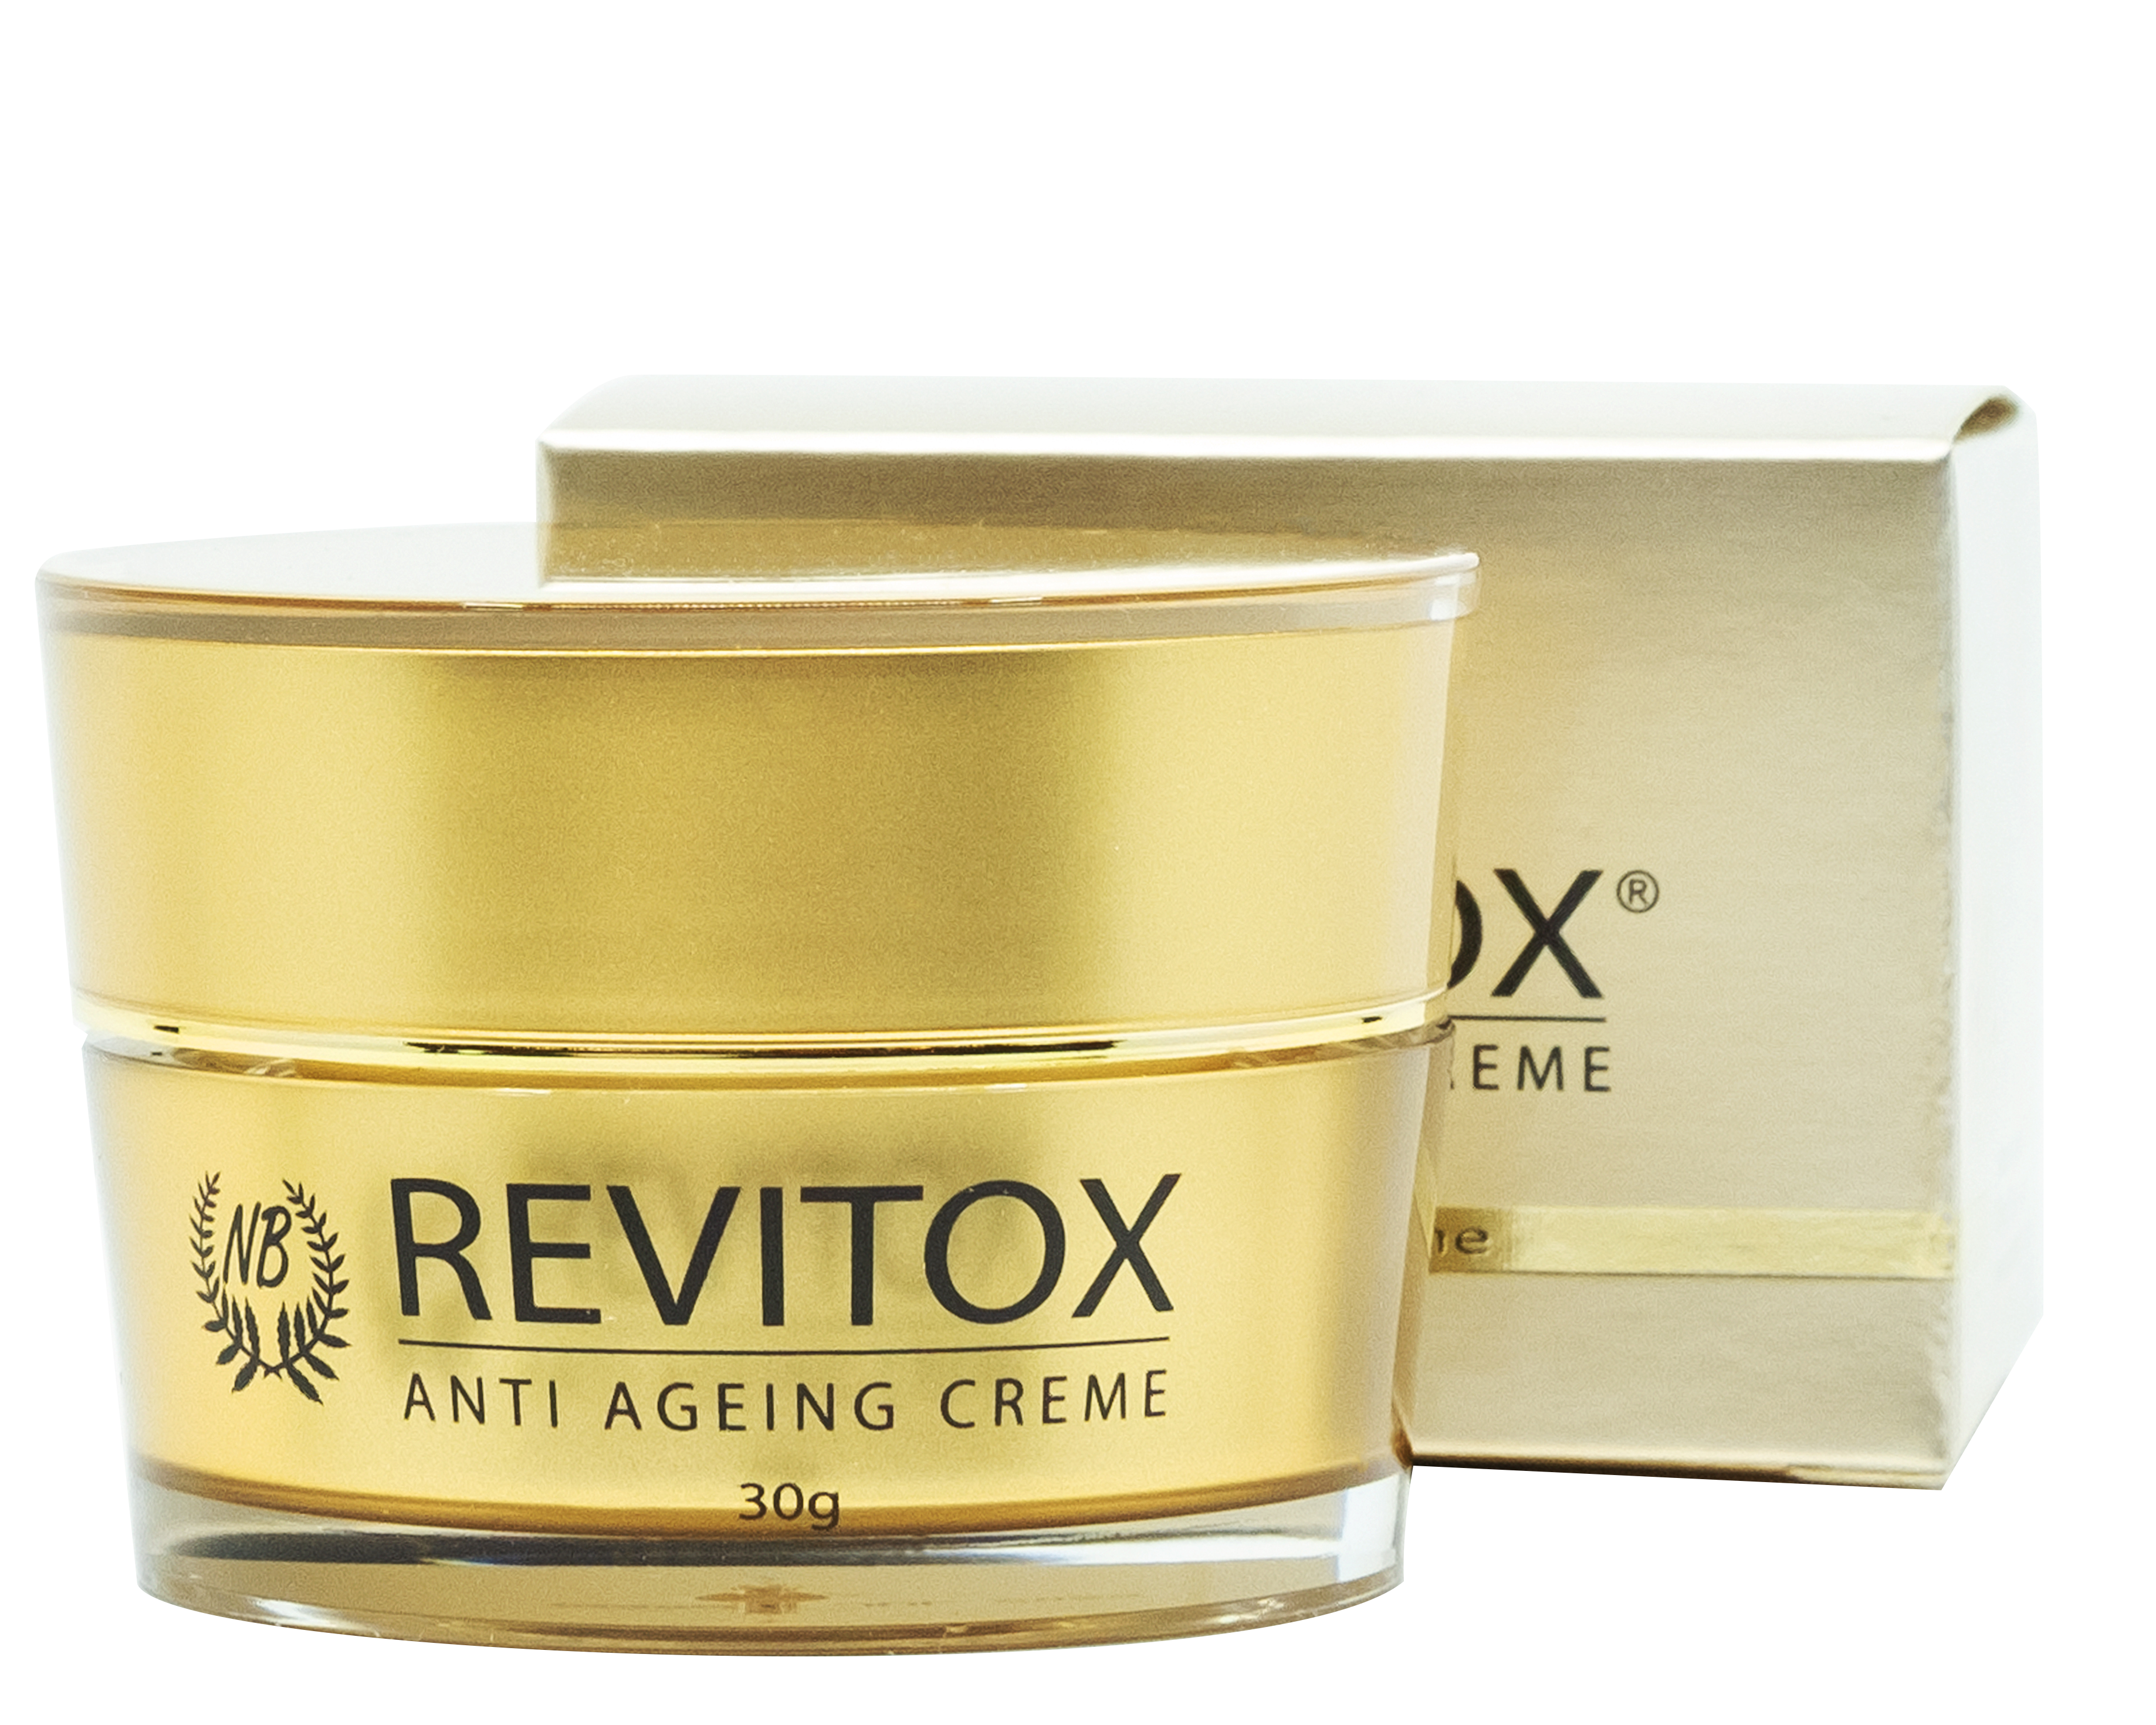 Nature's Beauty Revitox Anti-Ageing Creme 30g - 365 Health Limited